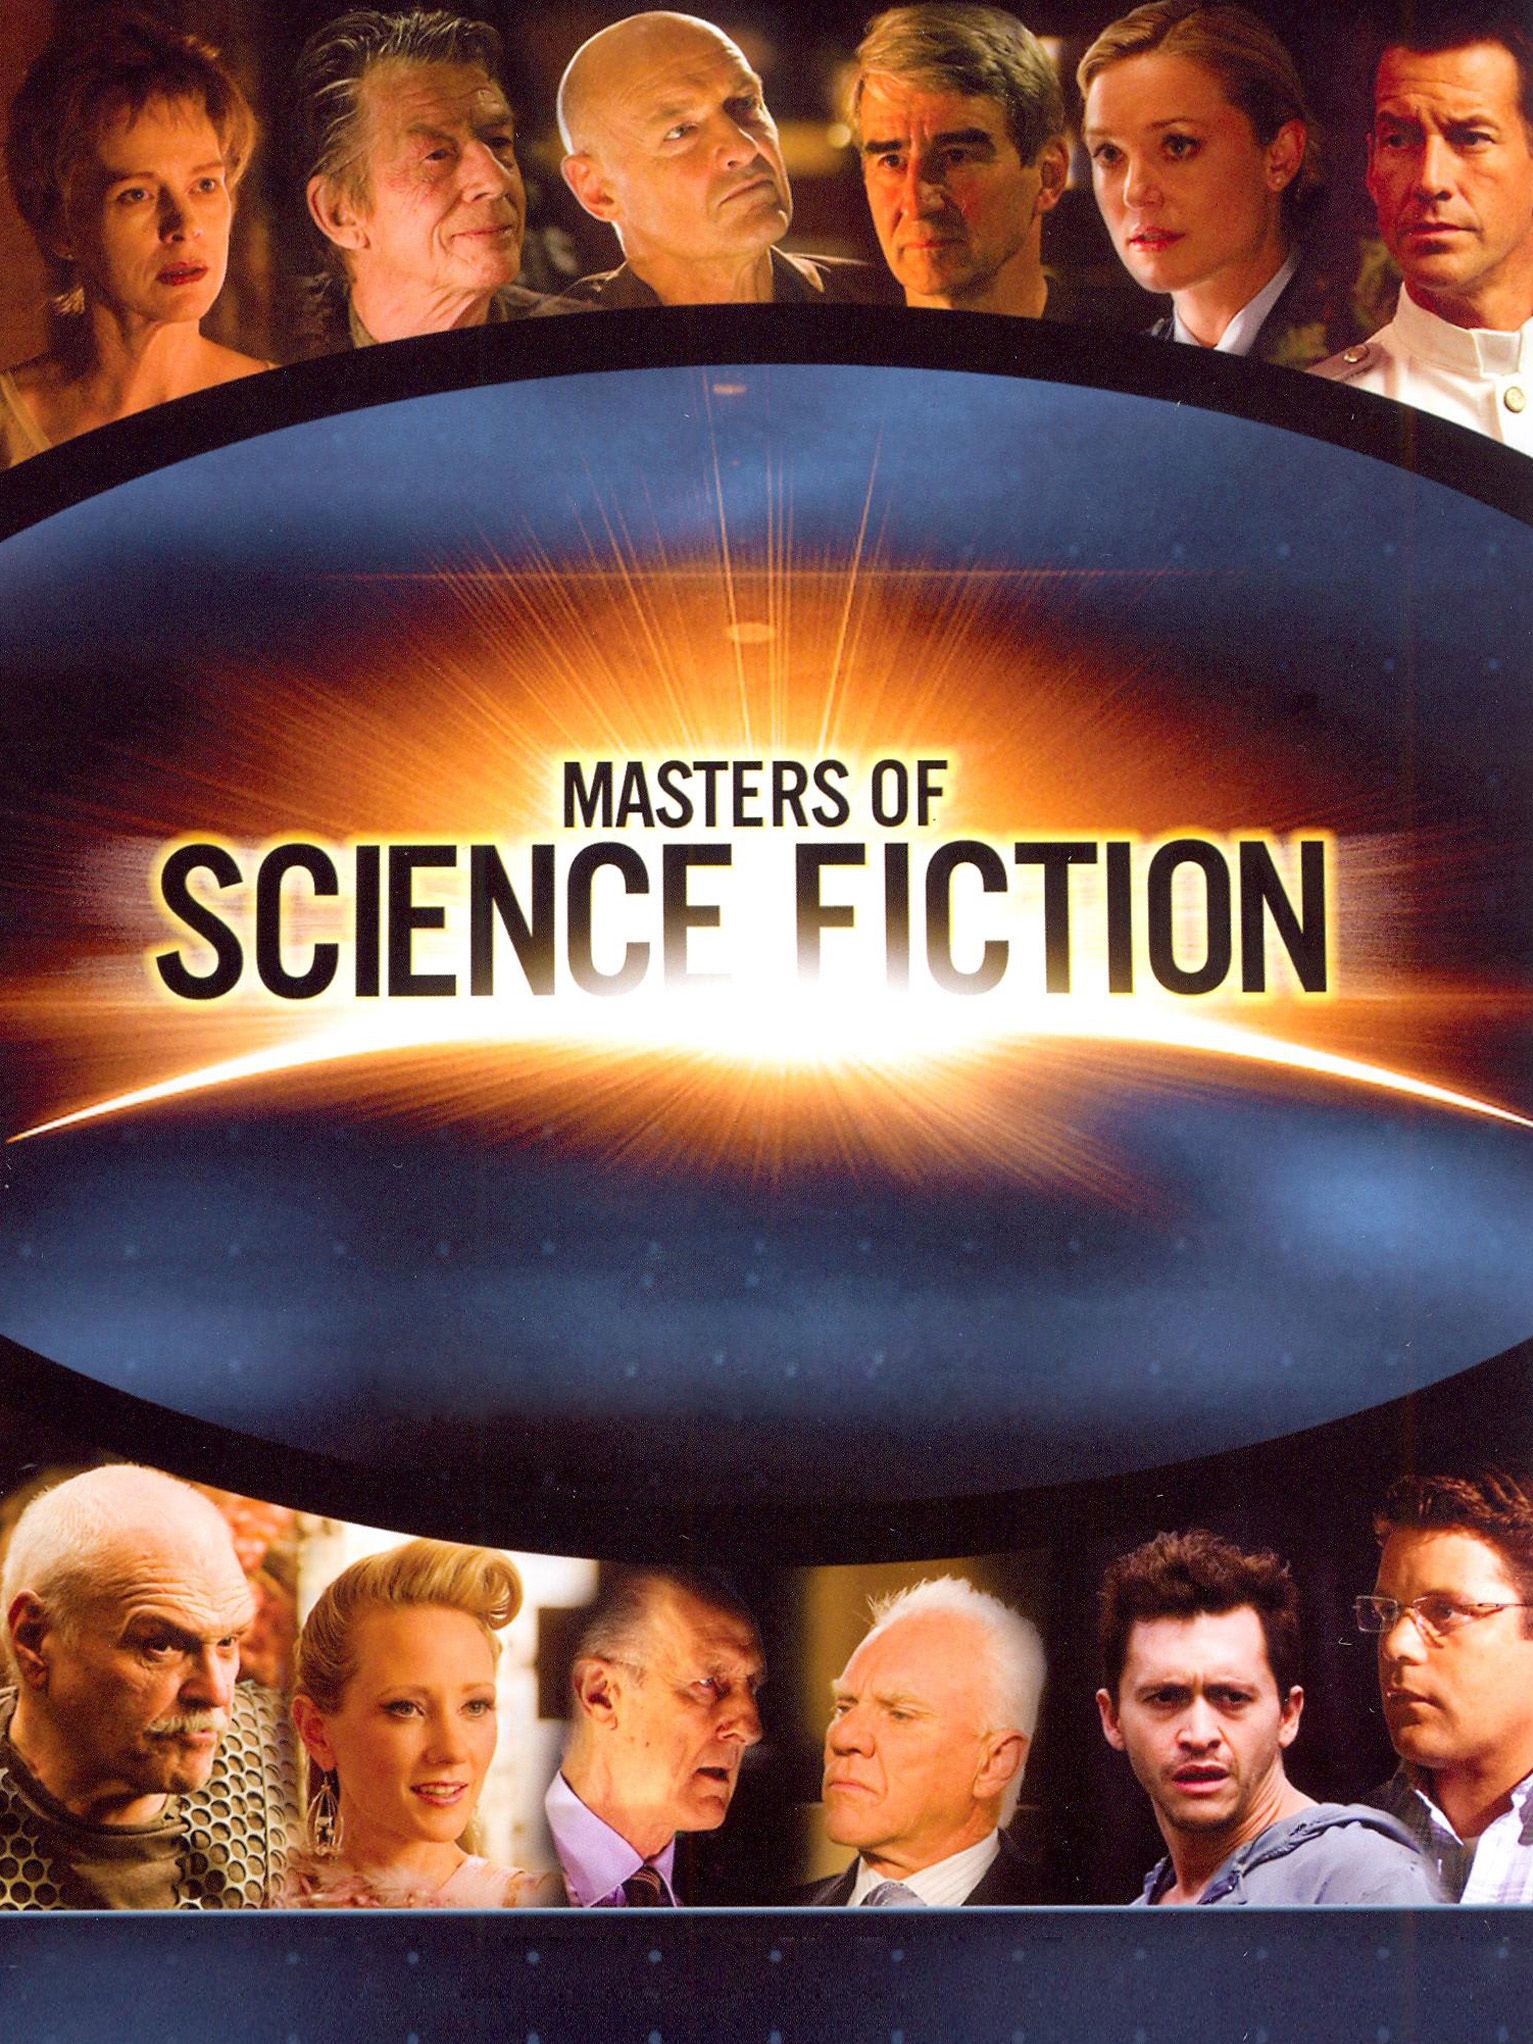 Masters of Science Fiction Saison 1 FRENCH HDLight 720p HDTV